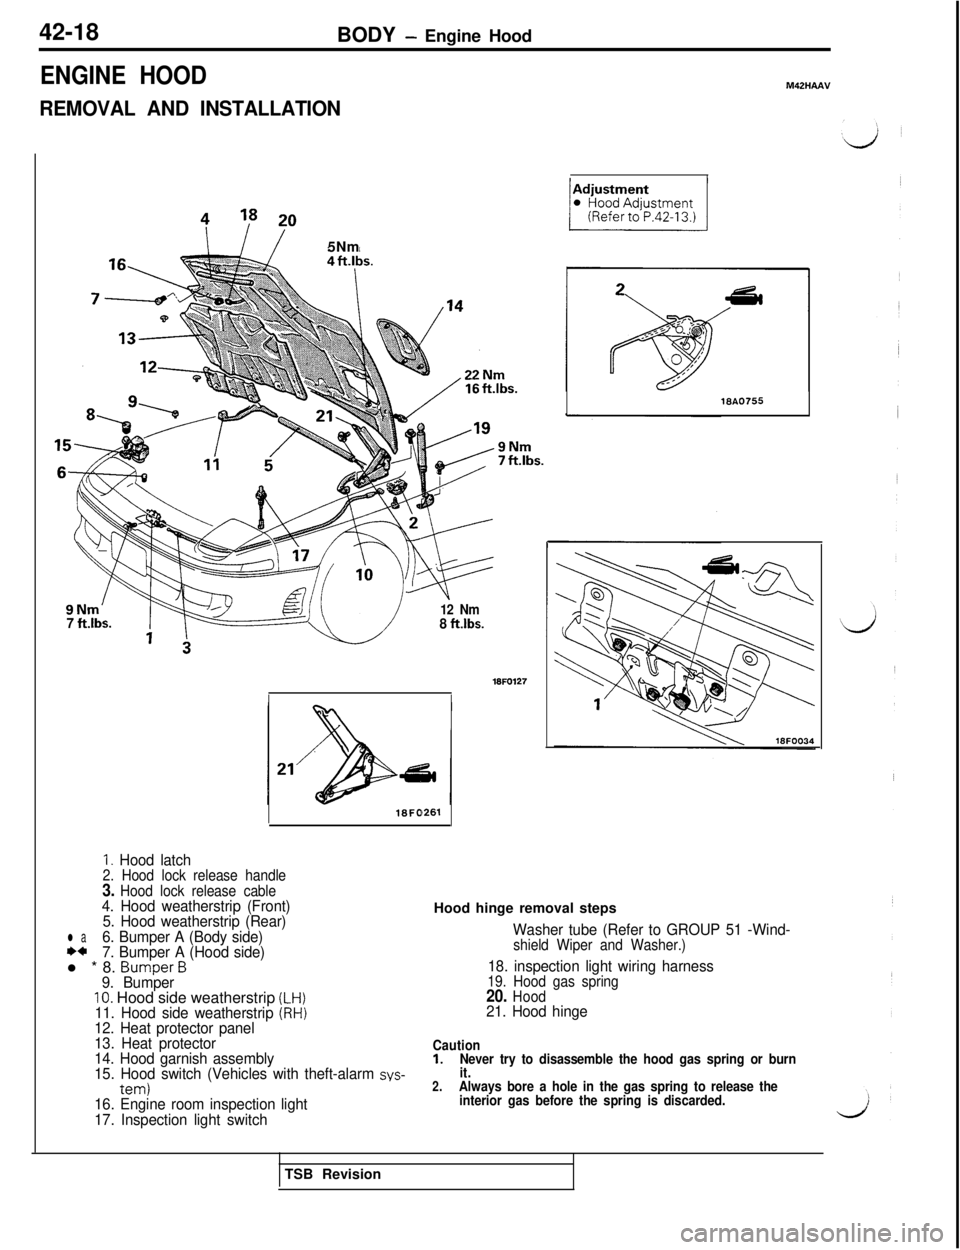 MITSUBISHI 3000GT 1991  Service Manual 42-18ENGINE HOODBODY 
- Engine Hood
M42HAAV
REMOVAL AND INSTALLATION5Nm
9Nm’7 ft.lbs.12 Nm\ /8 ft.lbs.
16FO12716FO261
16A0755
1. Hood latch2. Hood lock release handle3. Hood lock release cable4. Hoo